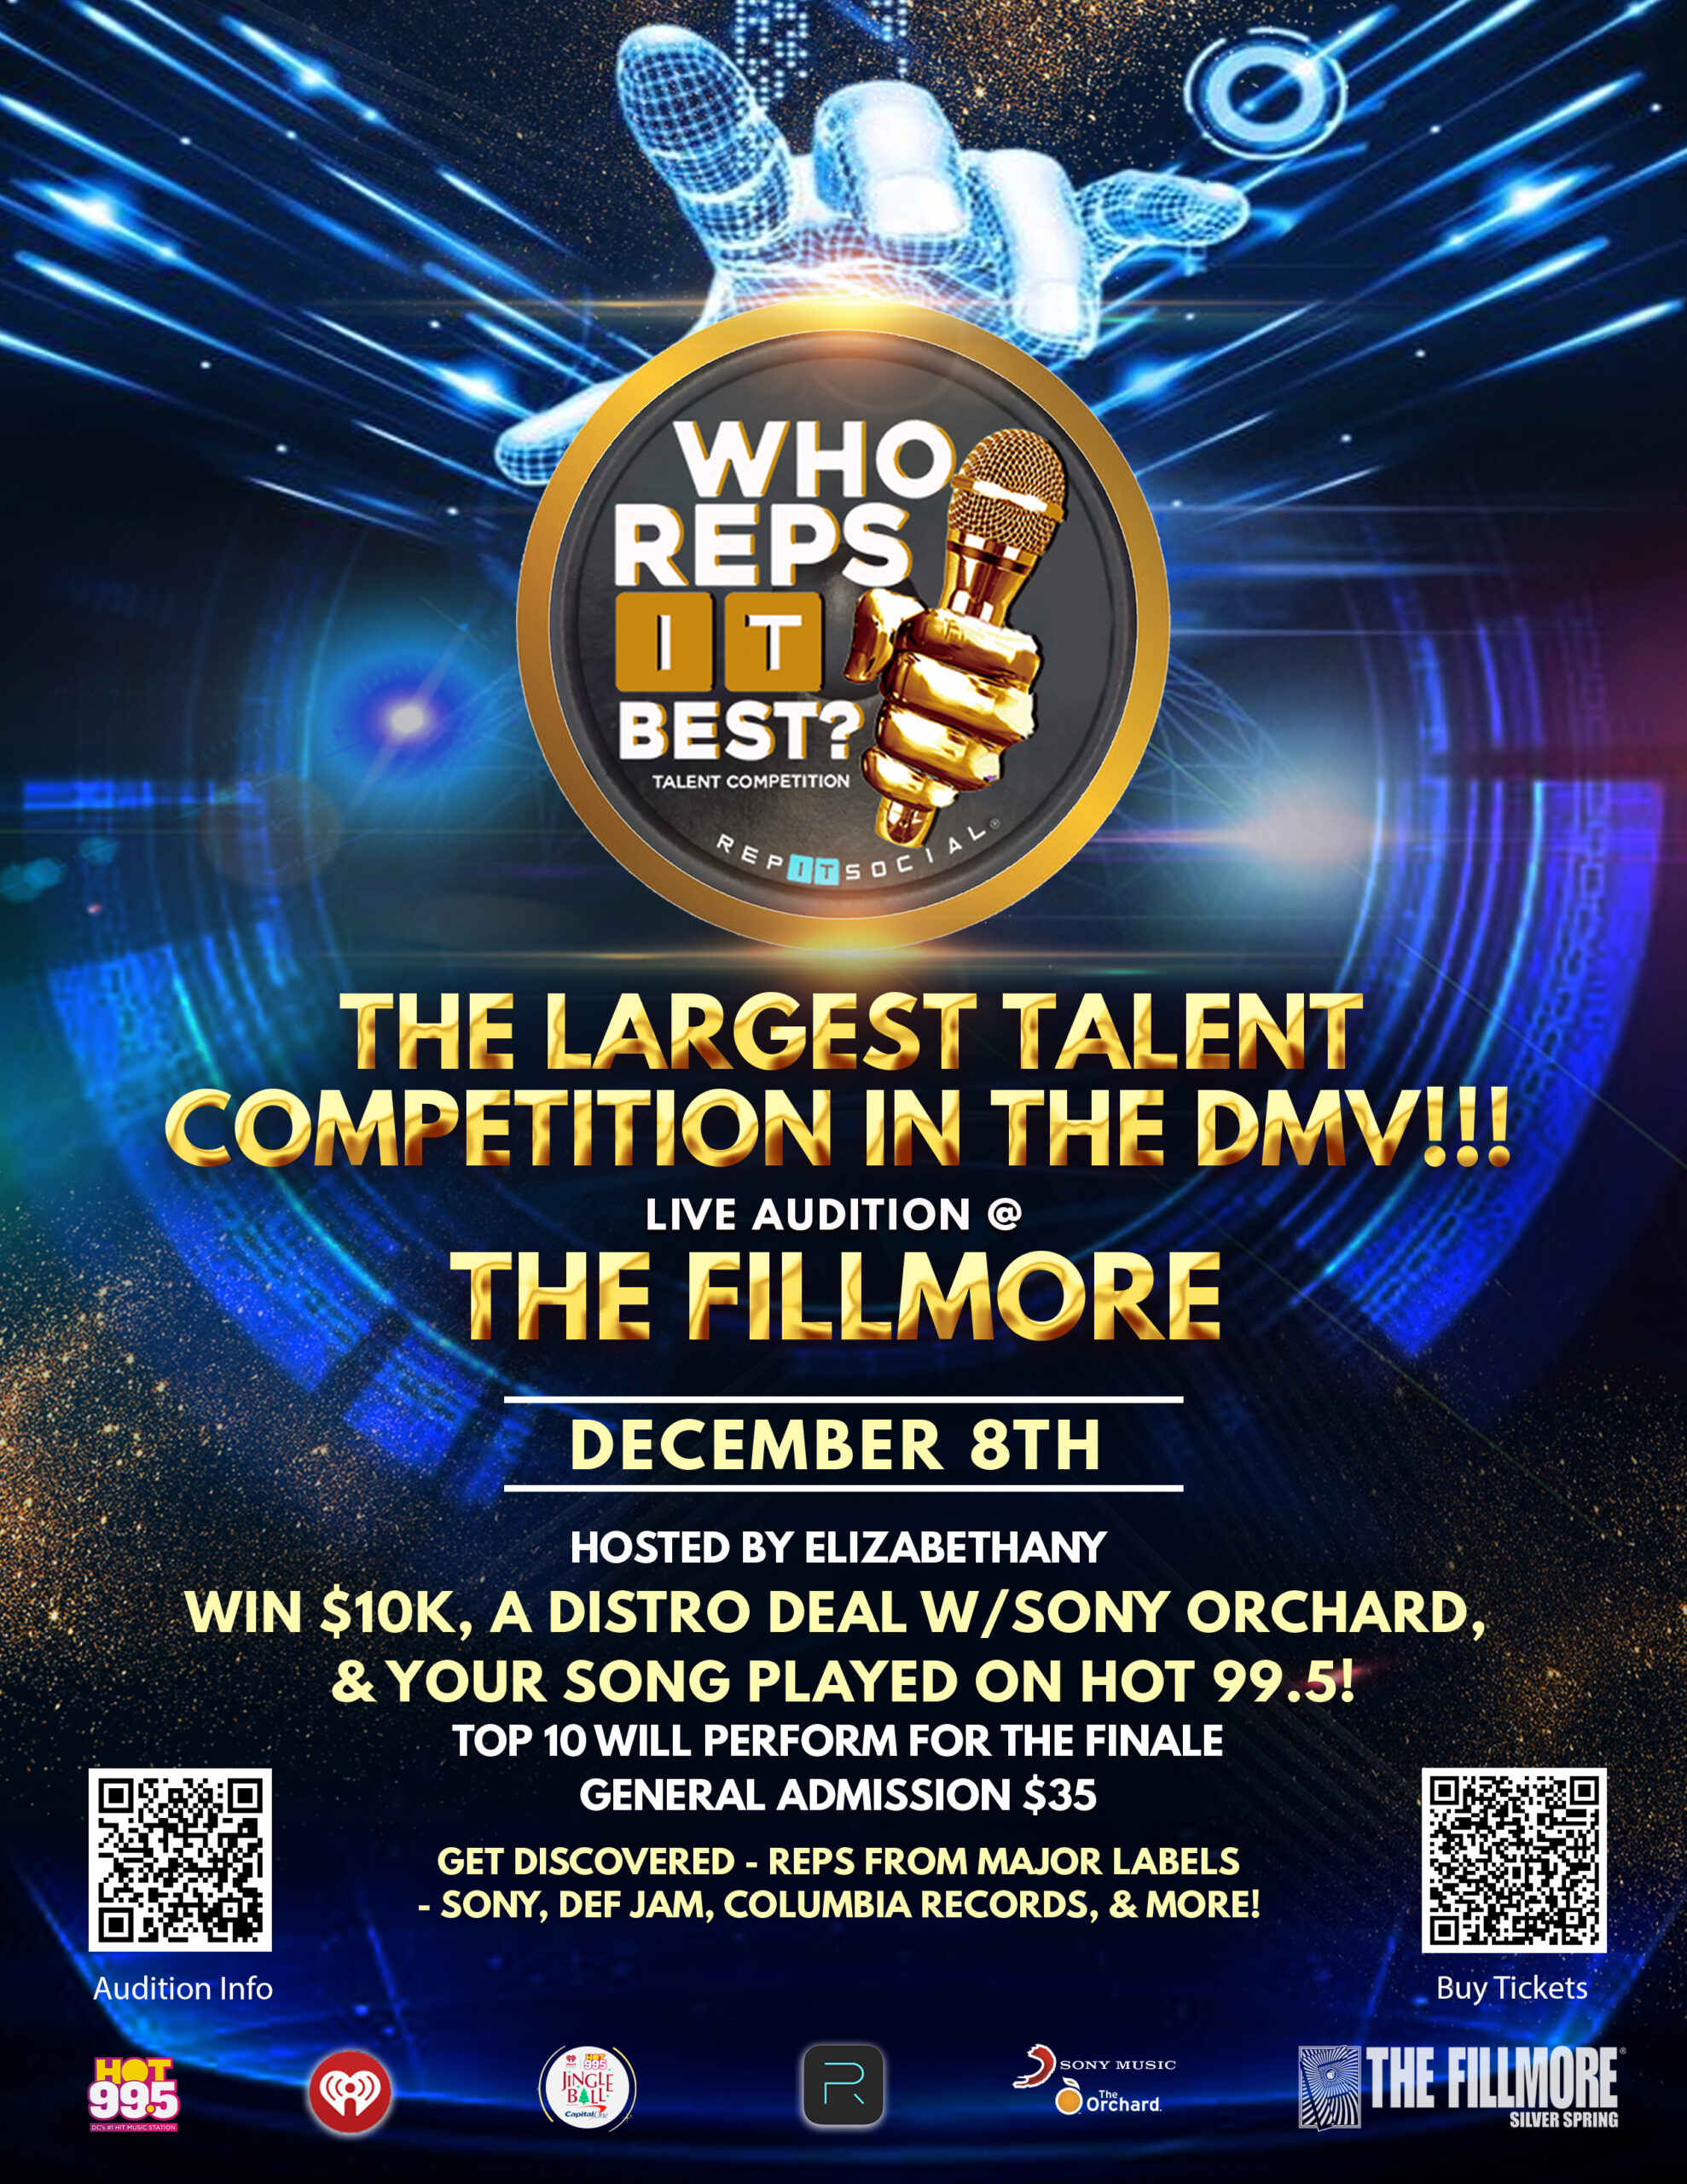 The largest talent competition in the DMV!